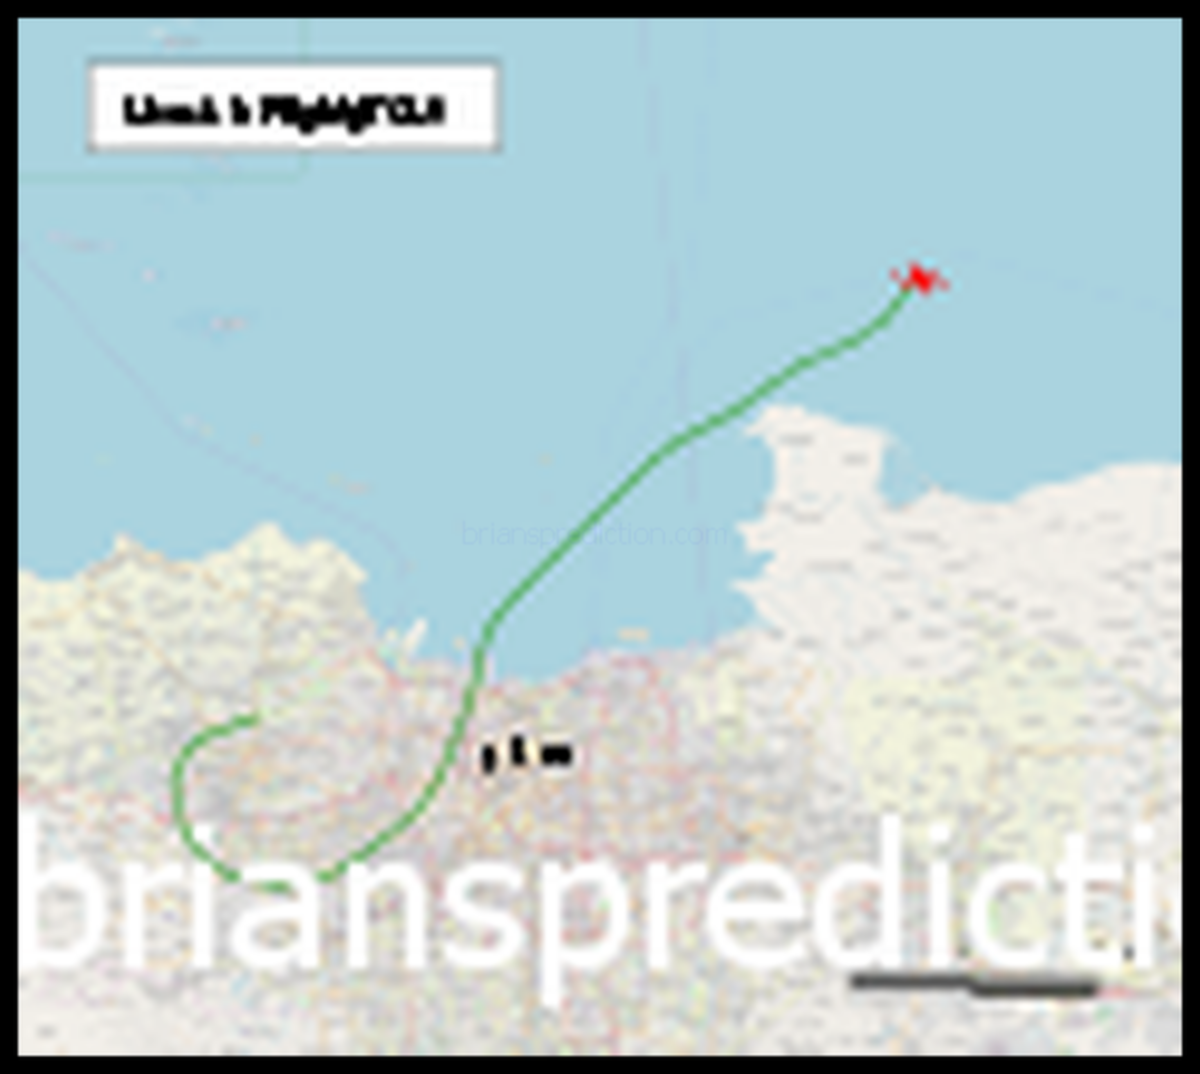 120px-Route of Lion Air Flight 610 svg Lion Air Flight 610 crash on October 29th 2018 is an act of terrorism not an accident by psychic Brian Ladd
120px-Route of Lion Air Flight 610 svg Lion Air Flight 610 crash on October 29th 2018 is an act of terrorism not an accident by psychic Brian Ladd
